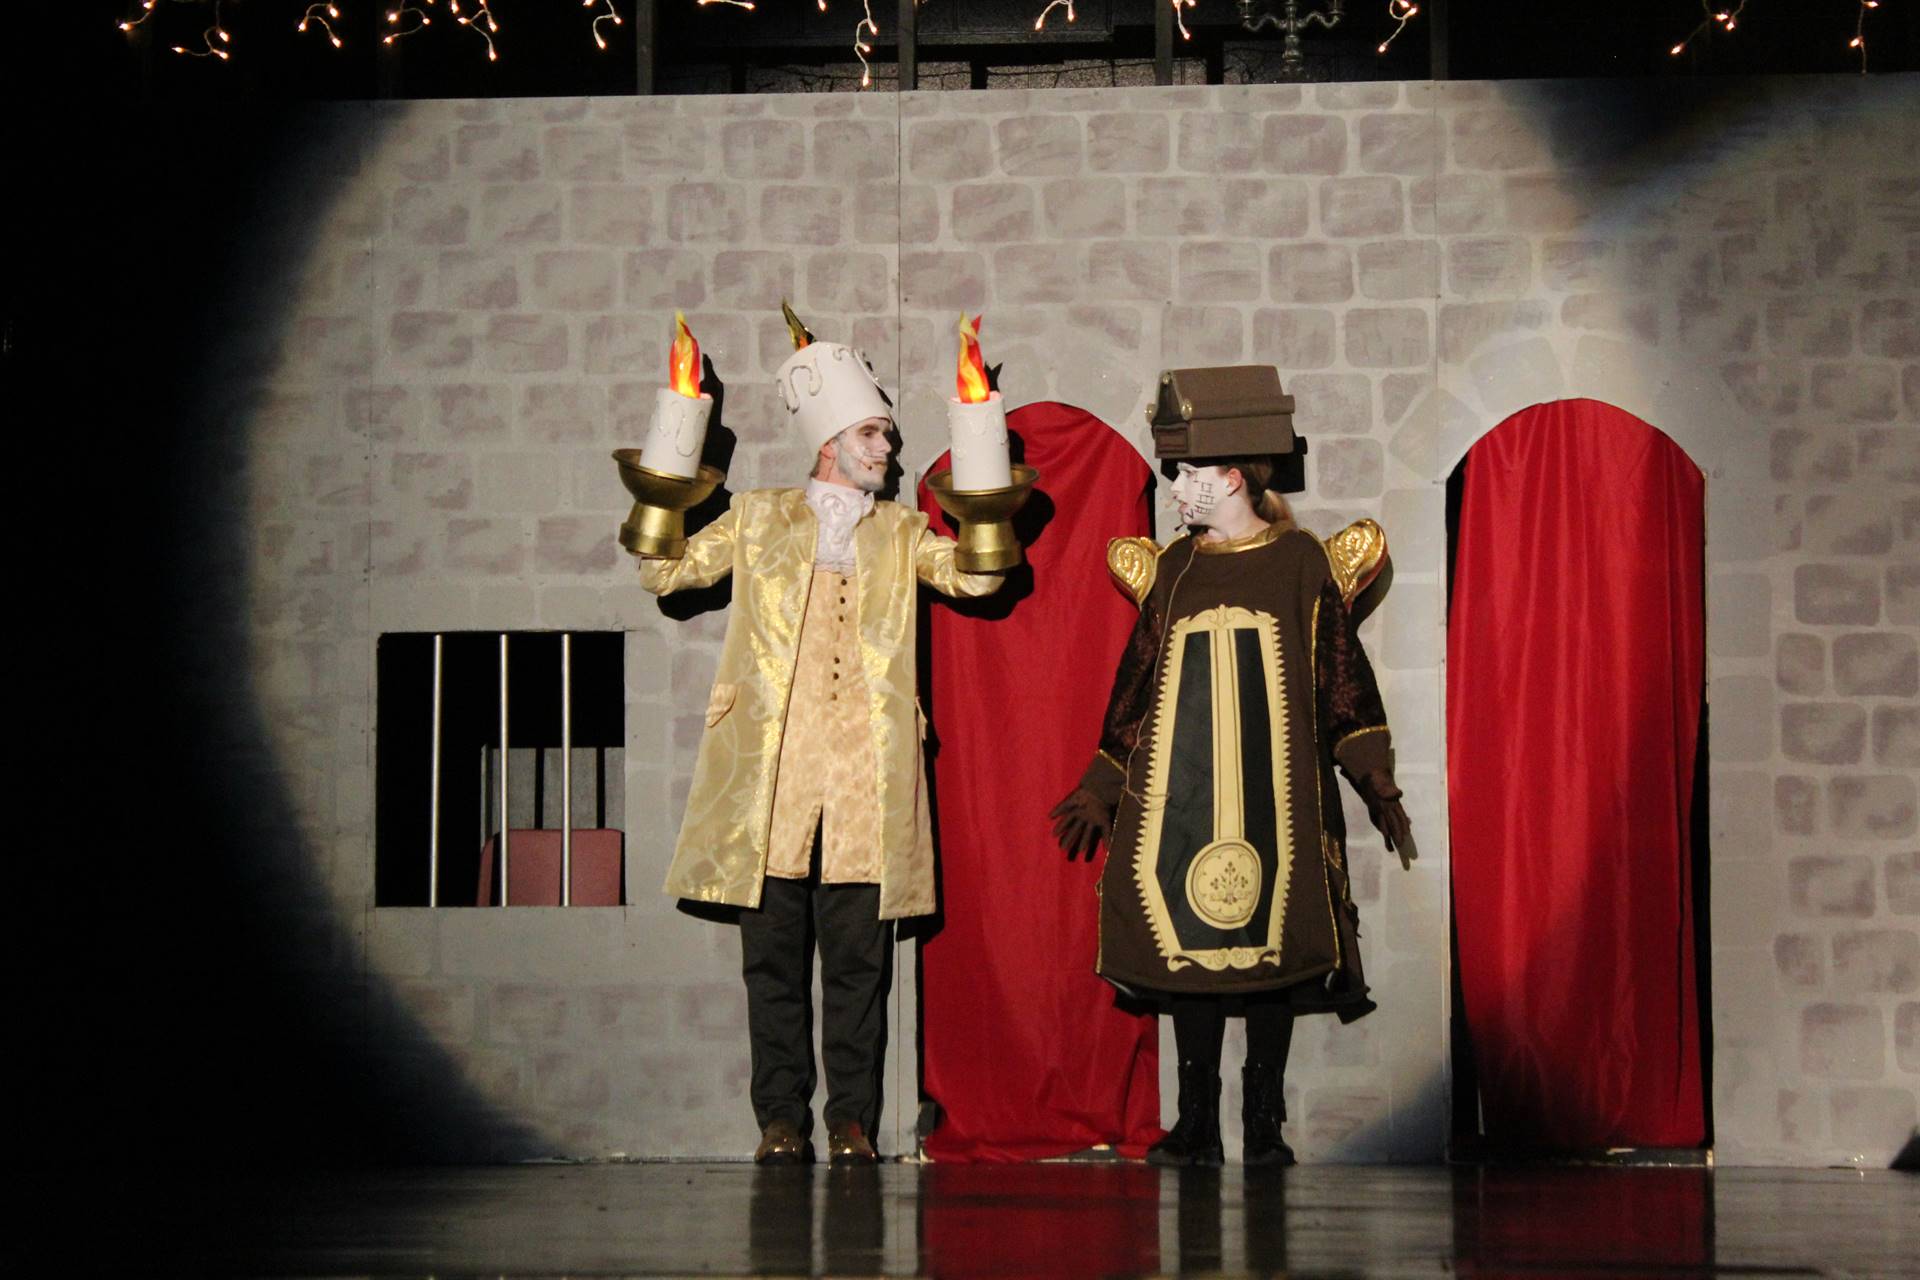 Beauty and the Beast Performance